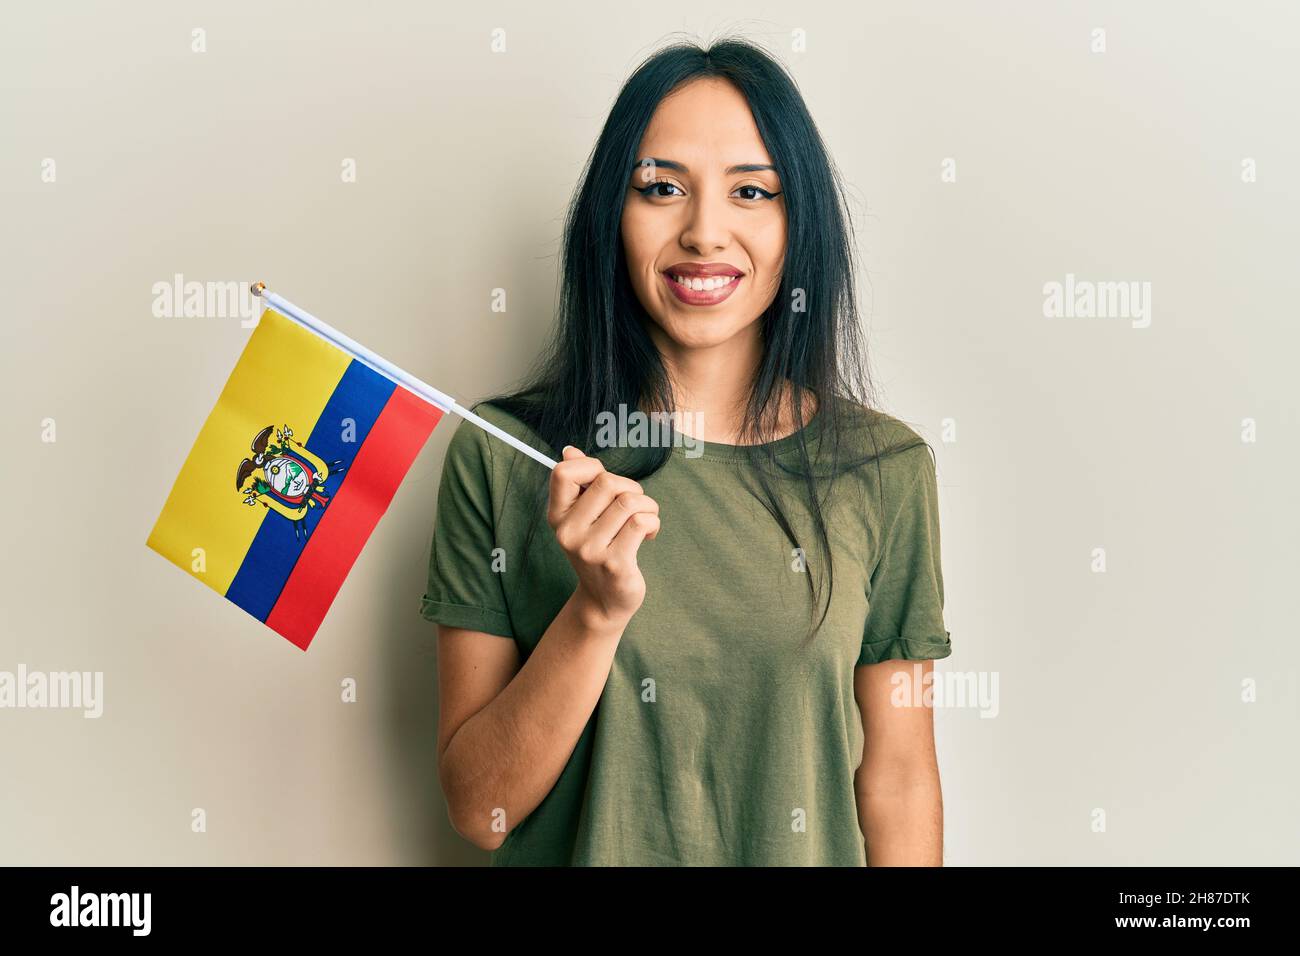 Young hispanic girl holding ecuador flag looking positive and happy standing and smiling with a confident smile showing teeth Stock Photo